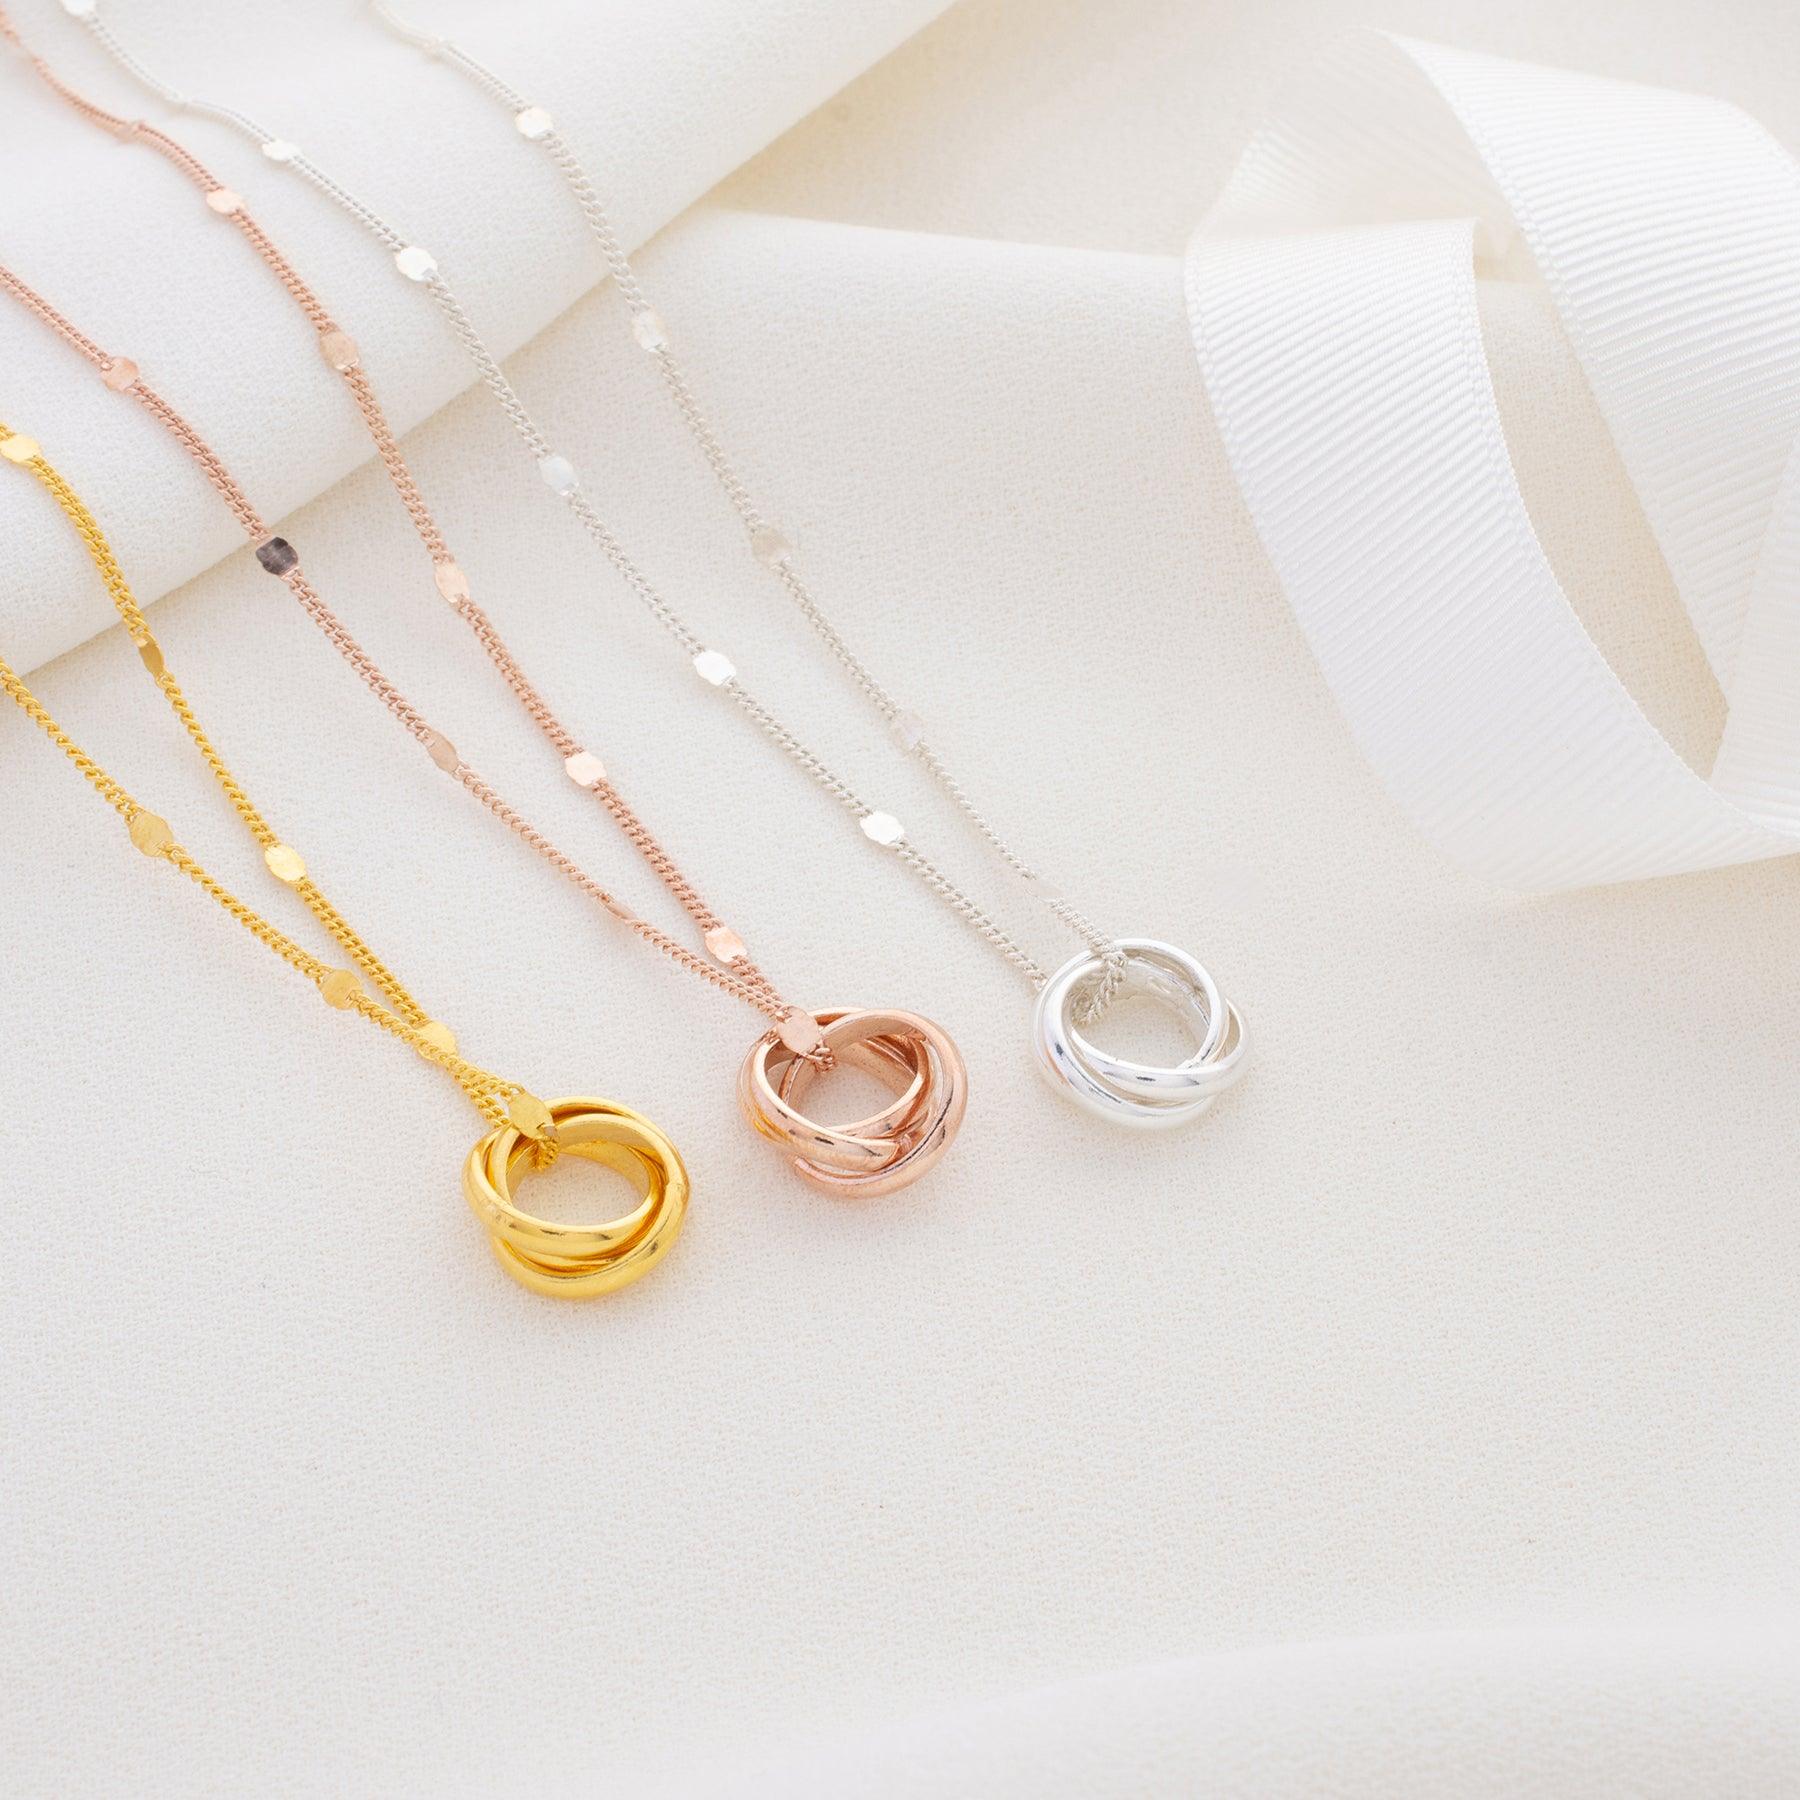 Interlocking Circles Station Chain Necklace • Russian Ring Necklace - Trending Silver Gifts